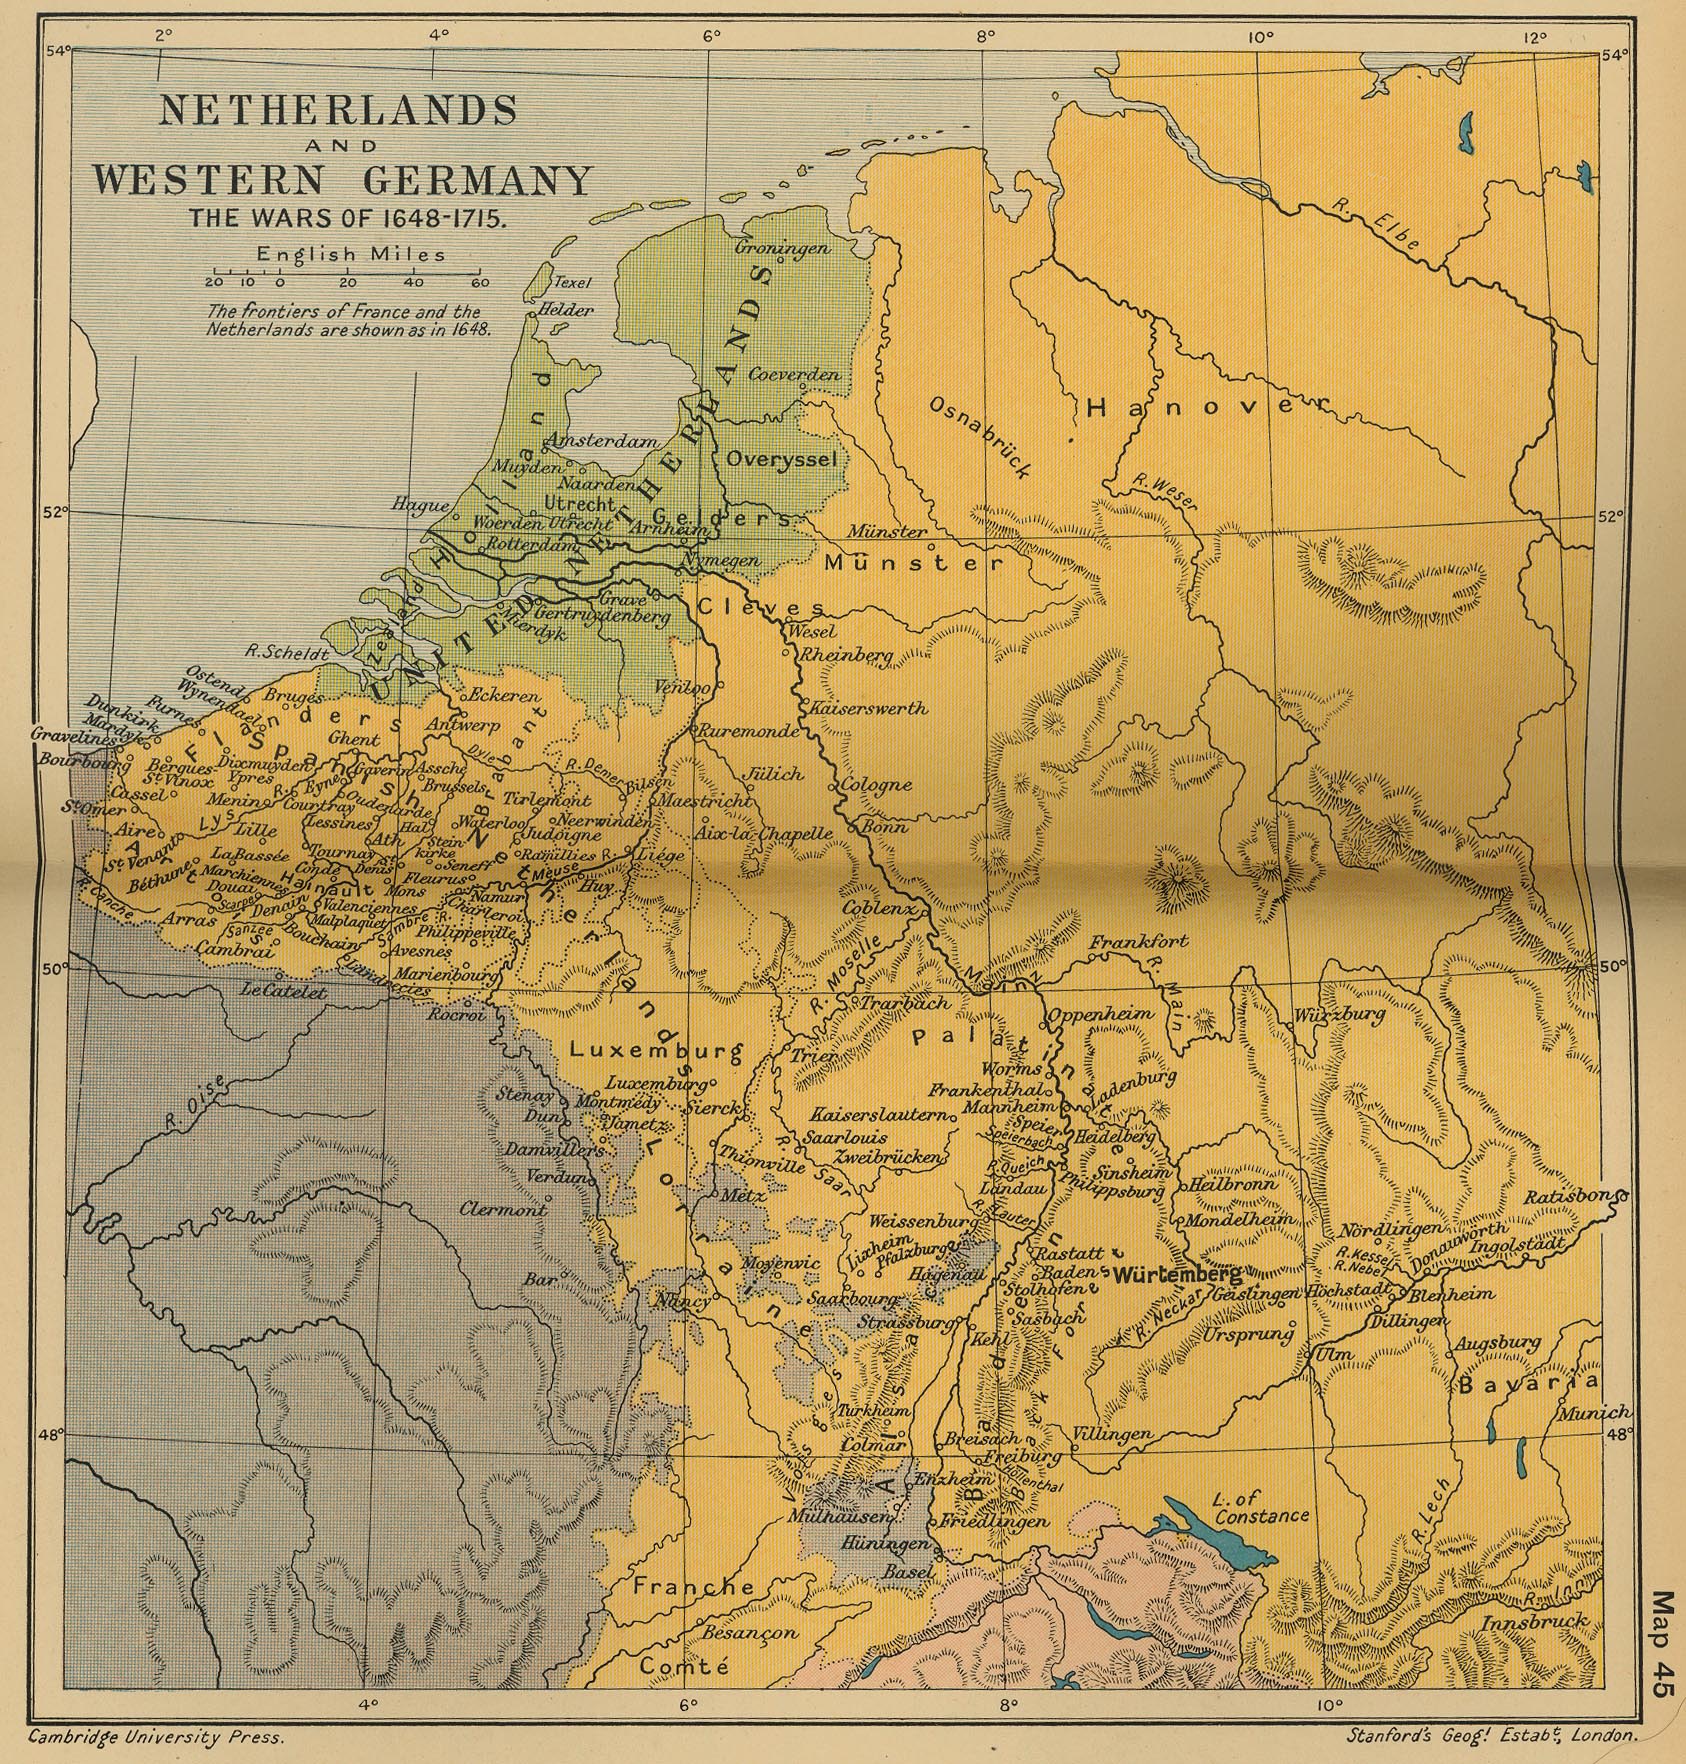 Map of the Netherlands and Western Germany 1648-1715